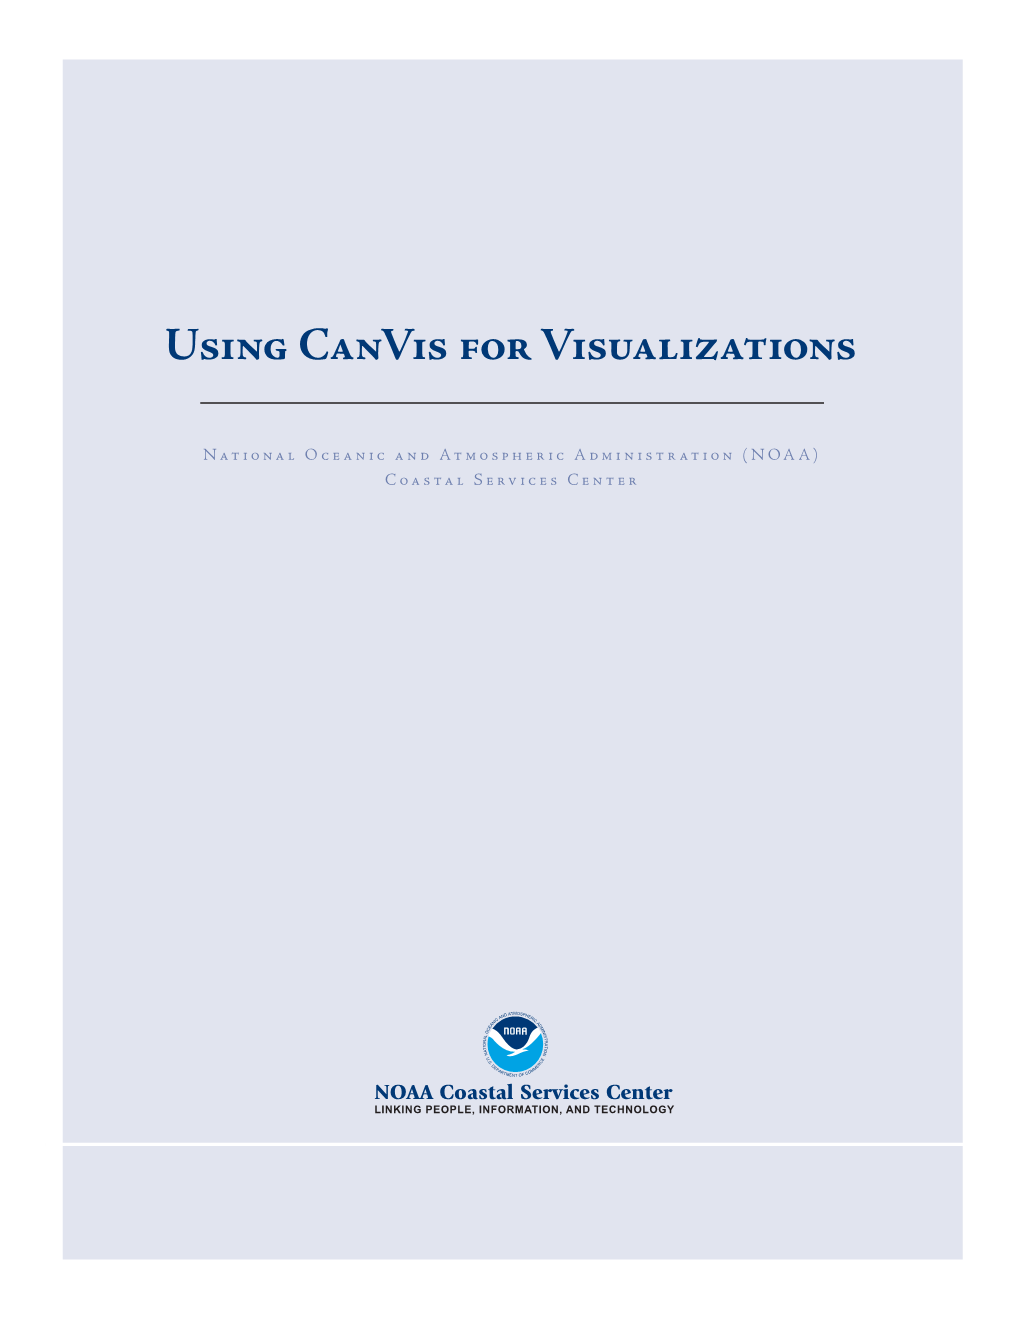 Using Canvis for Visualizations